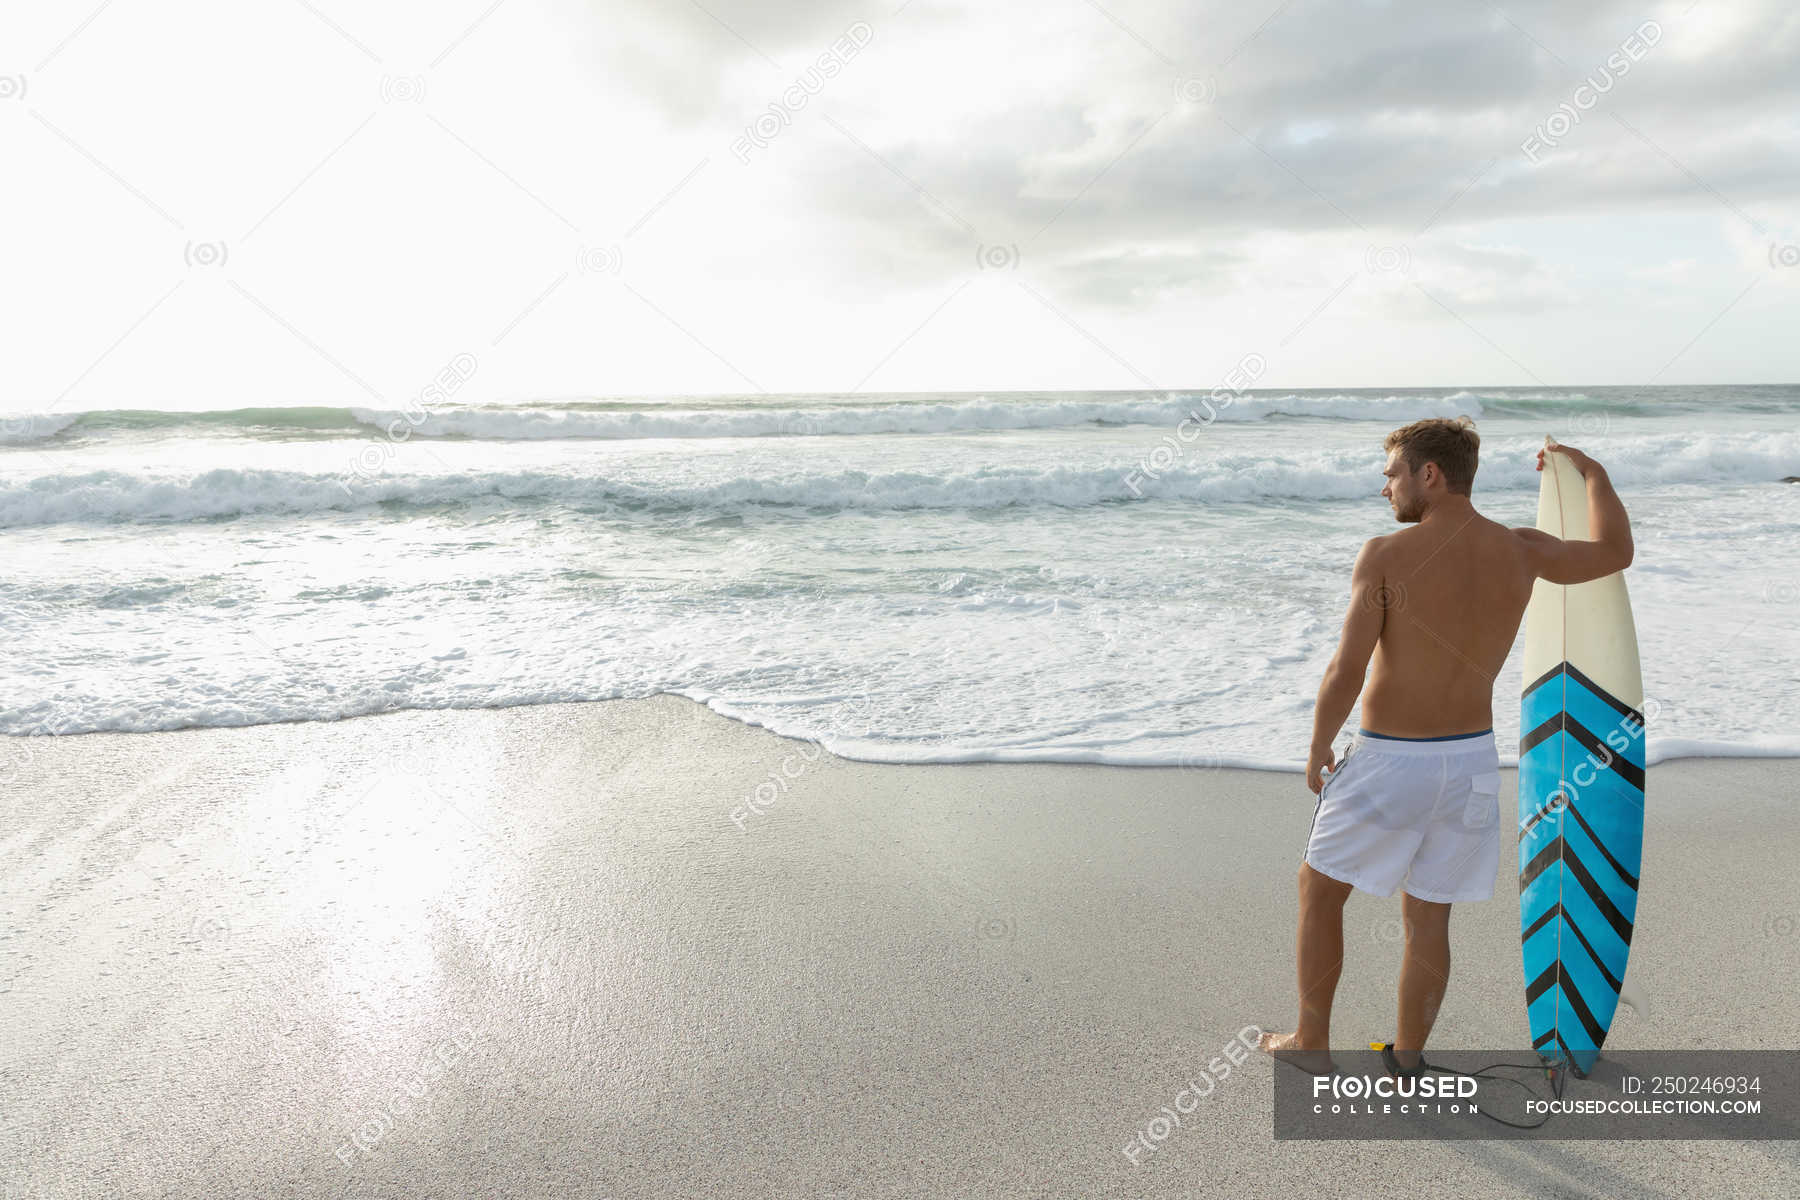 Focused 250246934 Stock Photo Rear View Blonde Male Surfer 